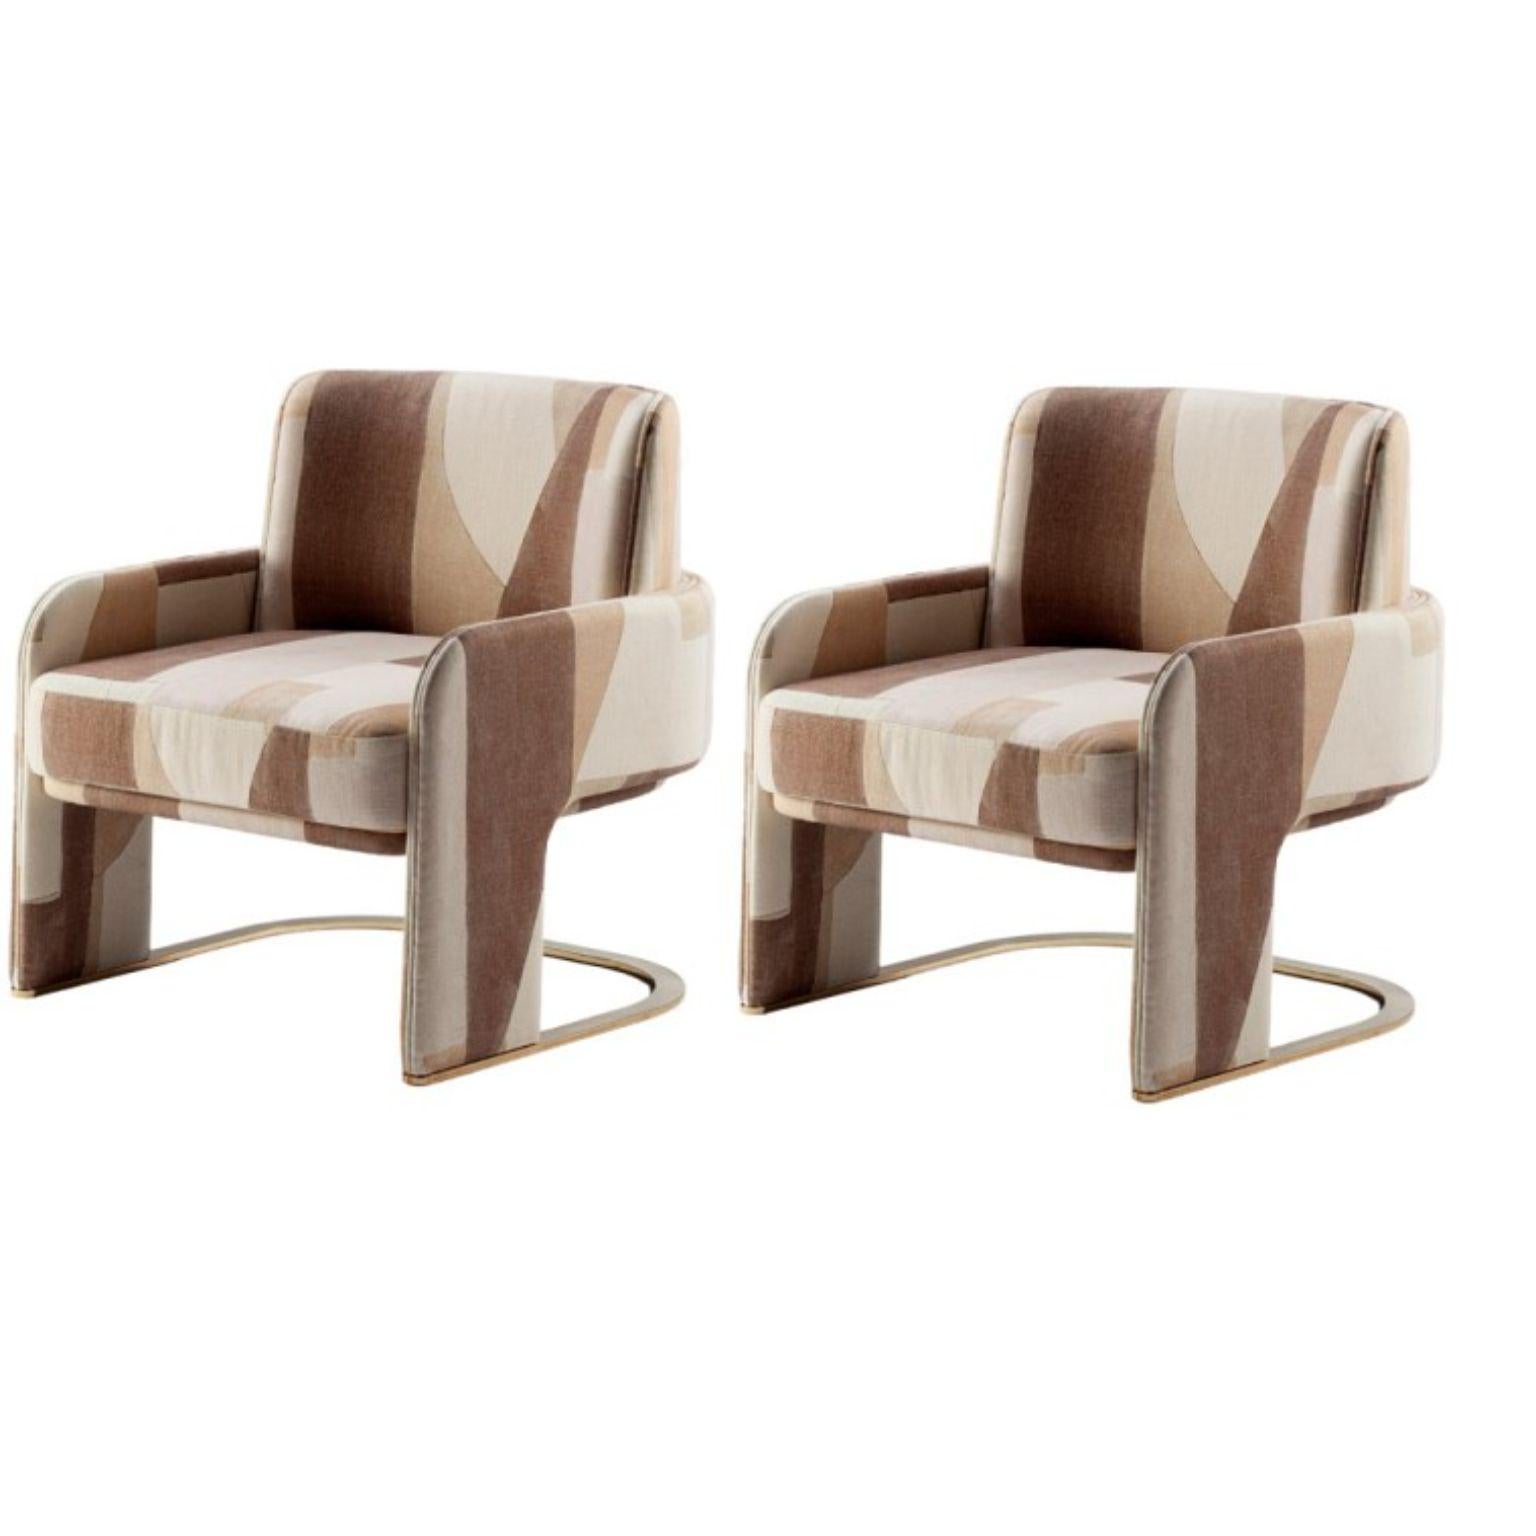 Set of 2 Odisseia Armchairs by Dooq
Dimensions: W 71 x D 66 x H 75 cm
Materials: Fabric or leather.
Feet Polished brass, copper or nickel, or satin brass, copper or nickel

Odisseia chair embodies the aesthetic spirit of the space age, a new